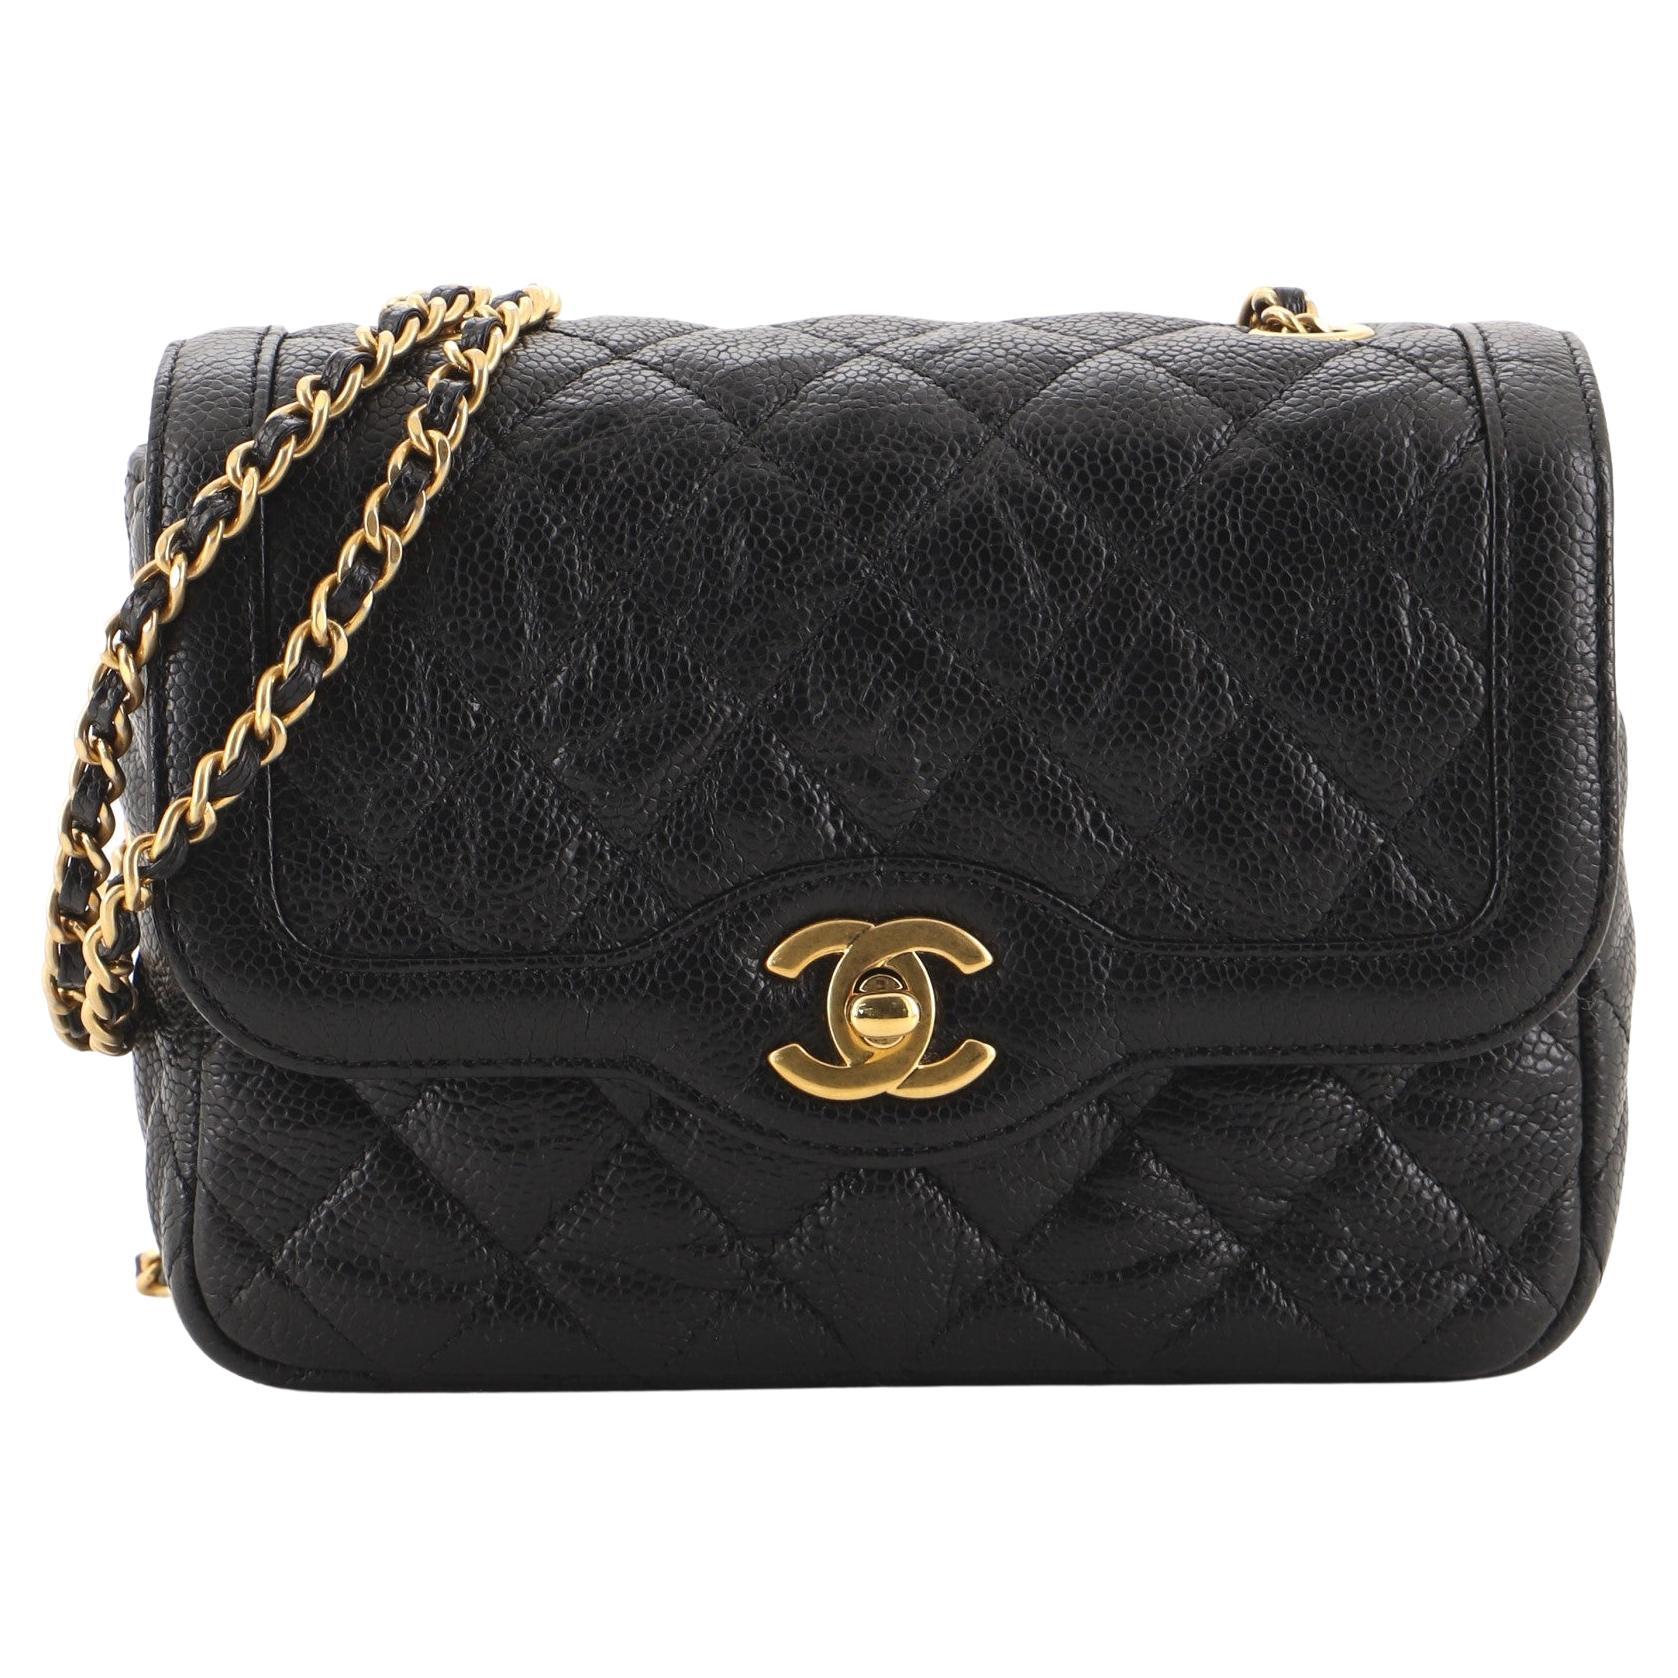 Chanel Sea Through Flap Bag Perforated Calfskin with Quilted